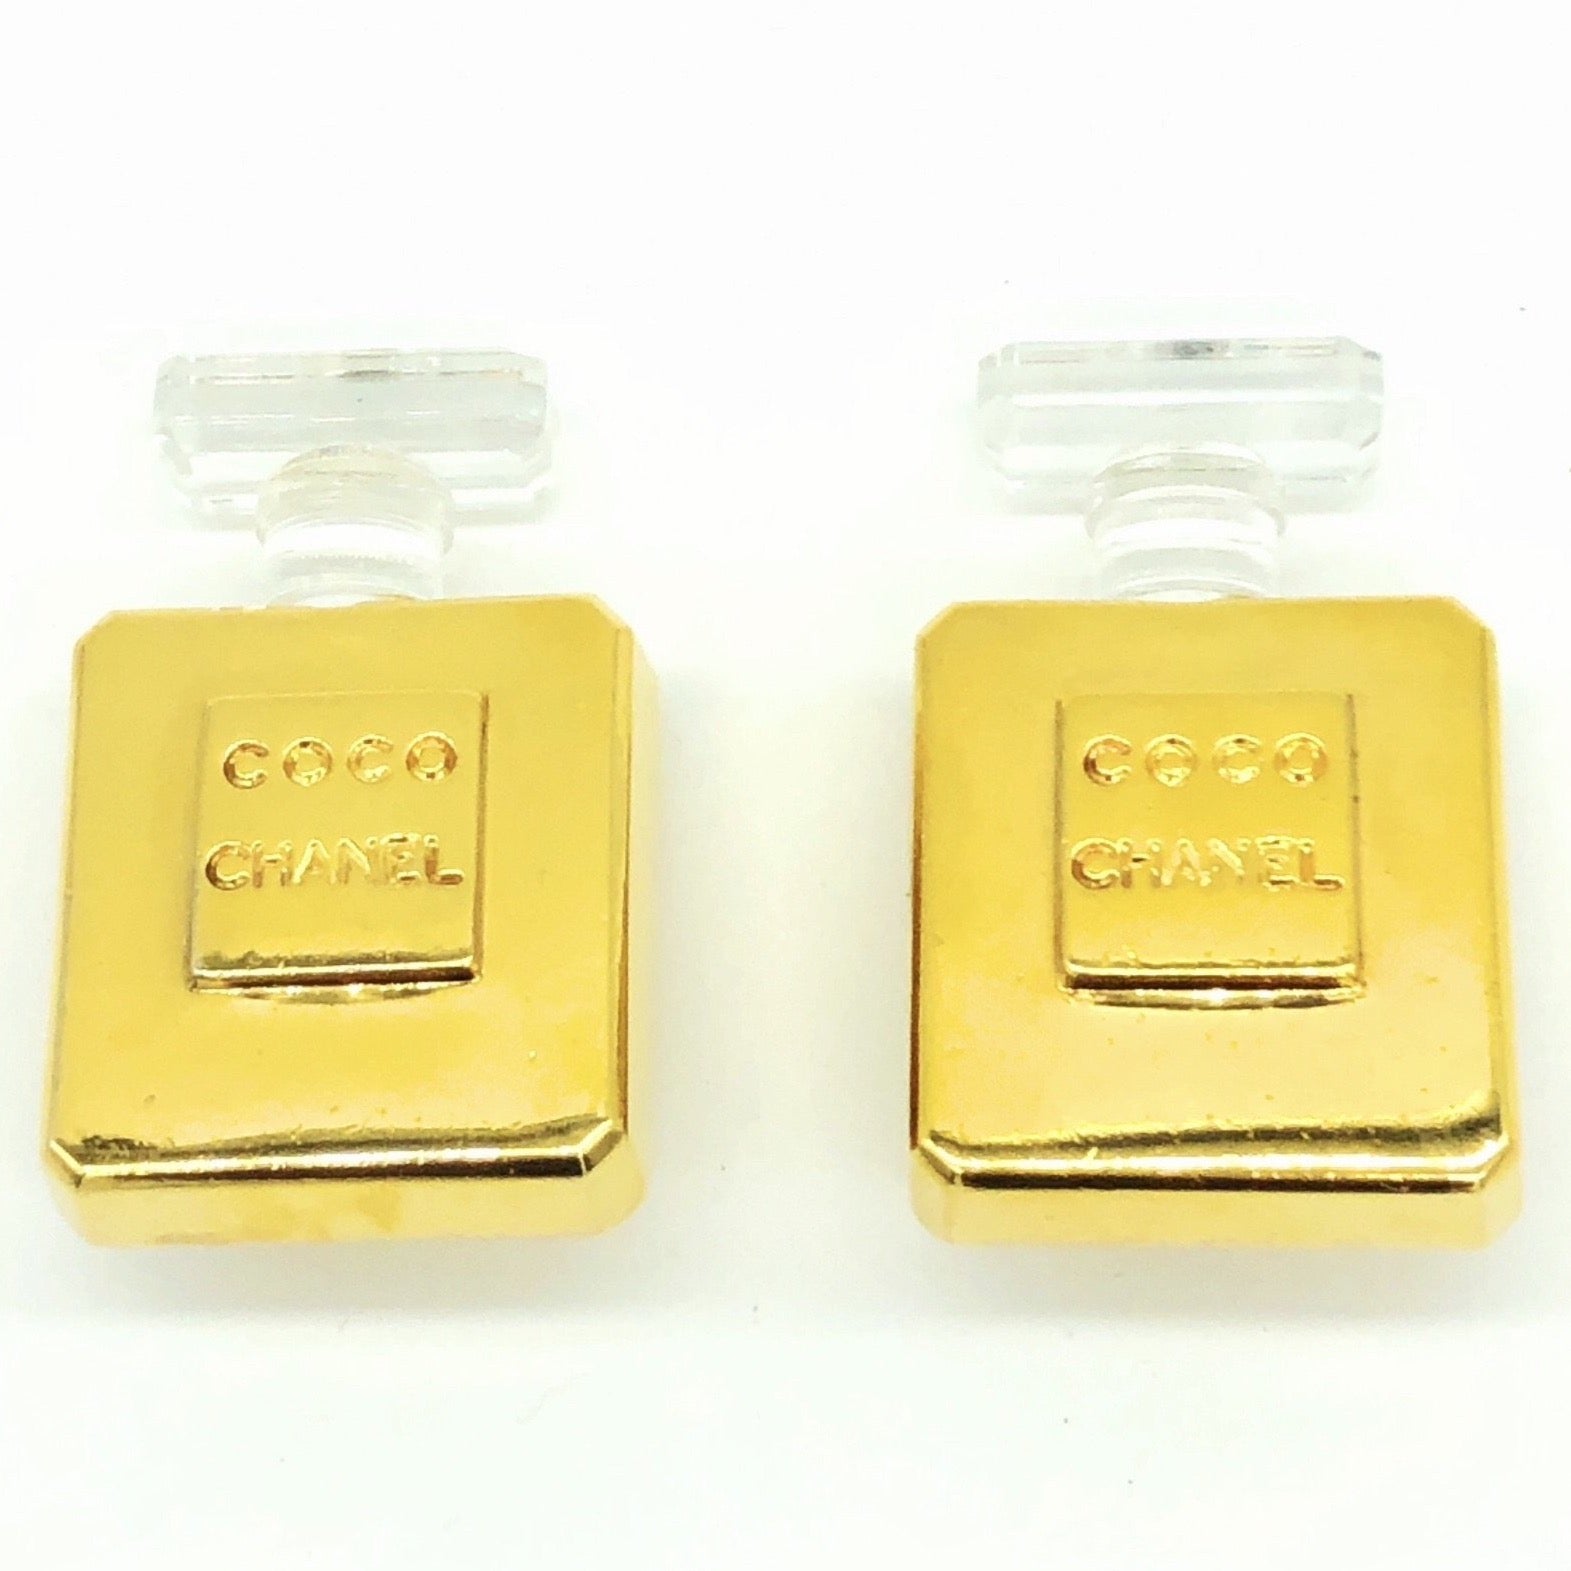 Chanel Perfume Bottle Nr5. Earrings A21 K - Touched Vintage